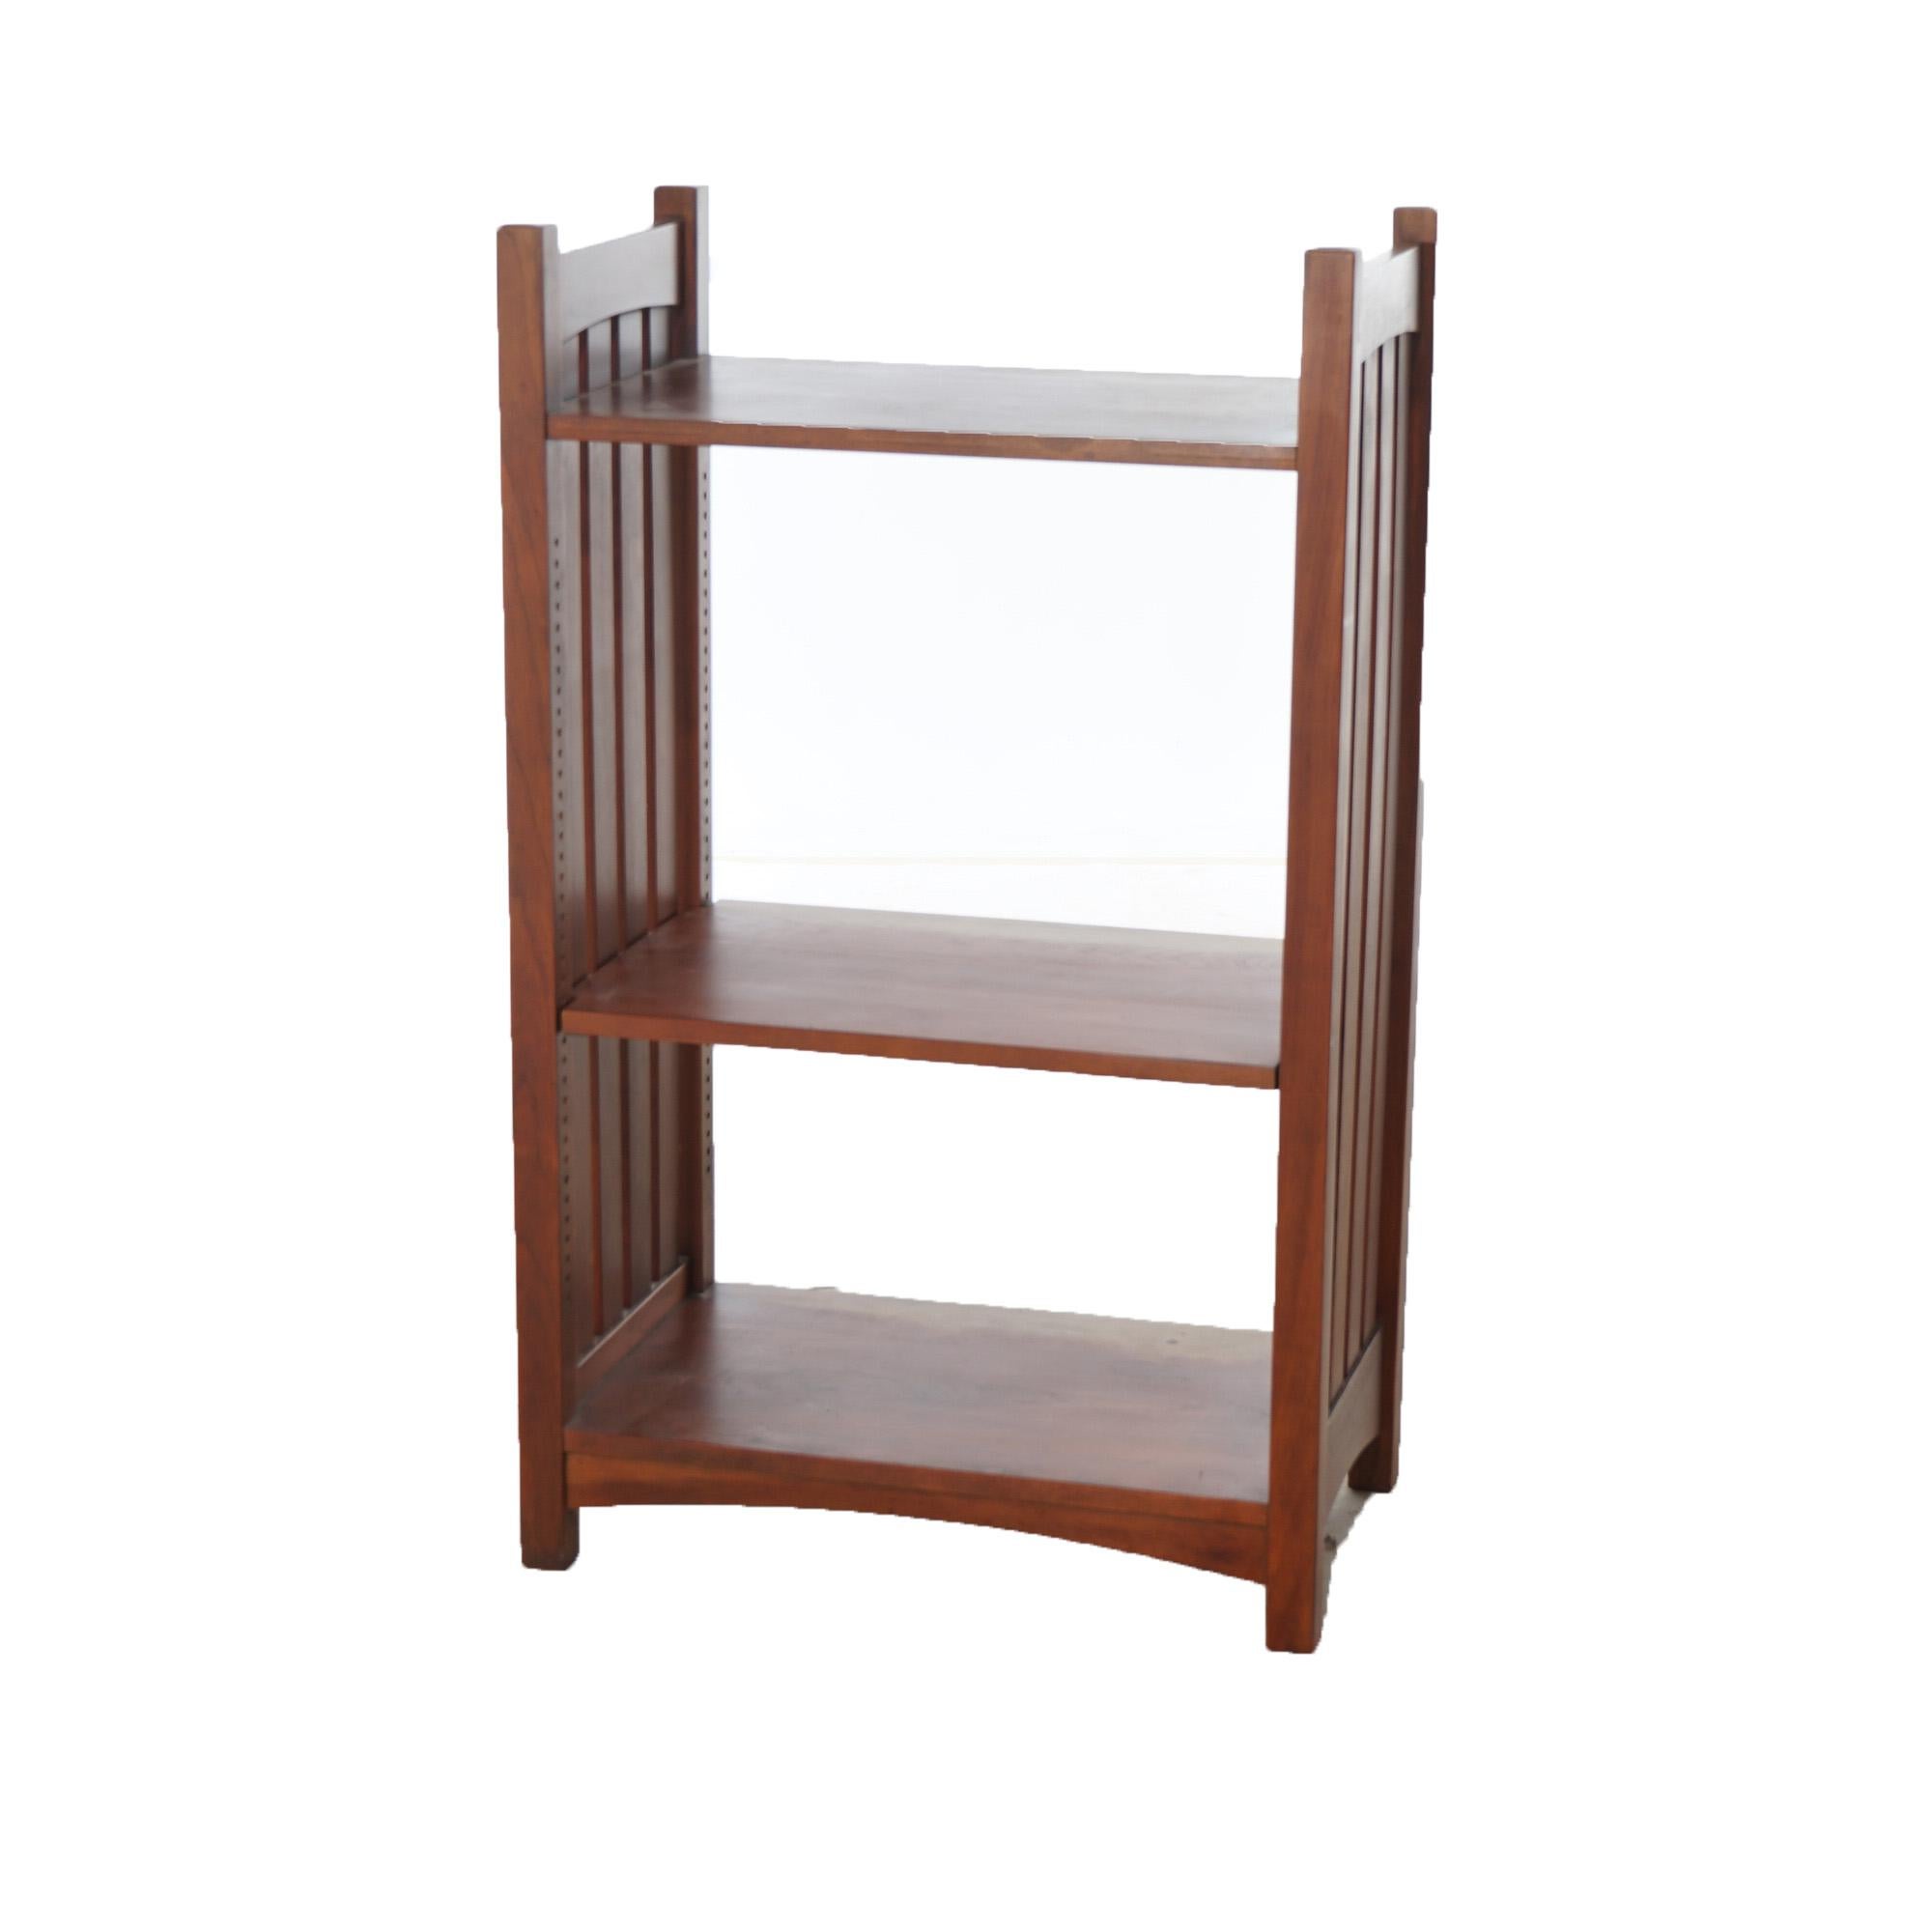 An Arts and Crafts Mission magazine stand offers mahogany construction with slat sides and three shelves, 20th century
Measures - 41